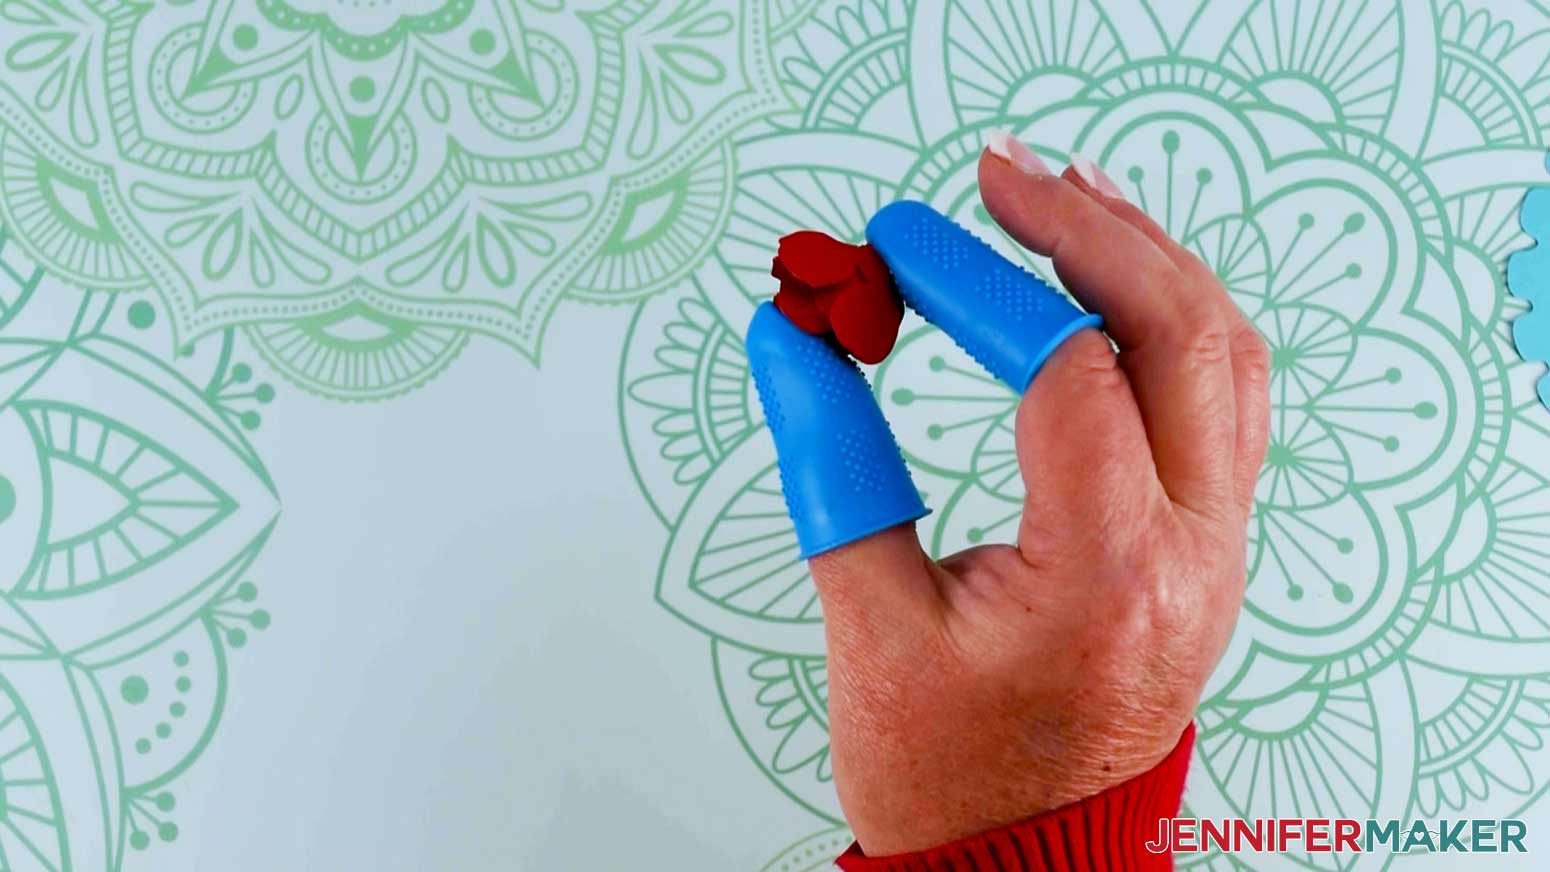 Press and hold the bottom of the paper flower with finger protection